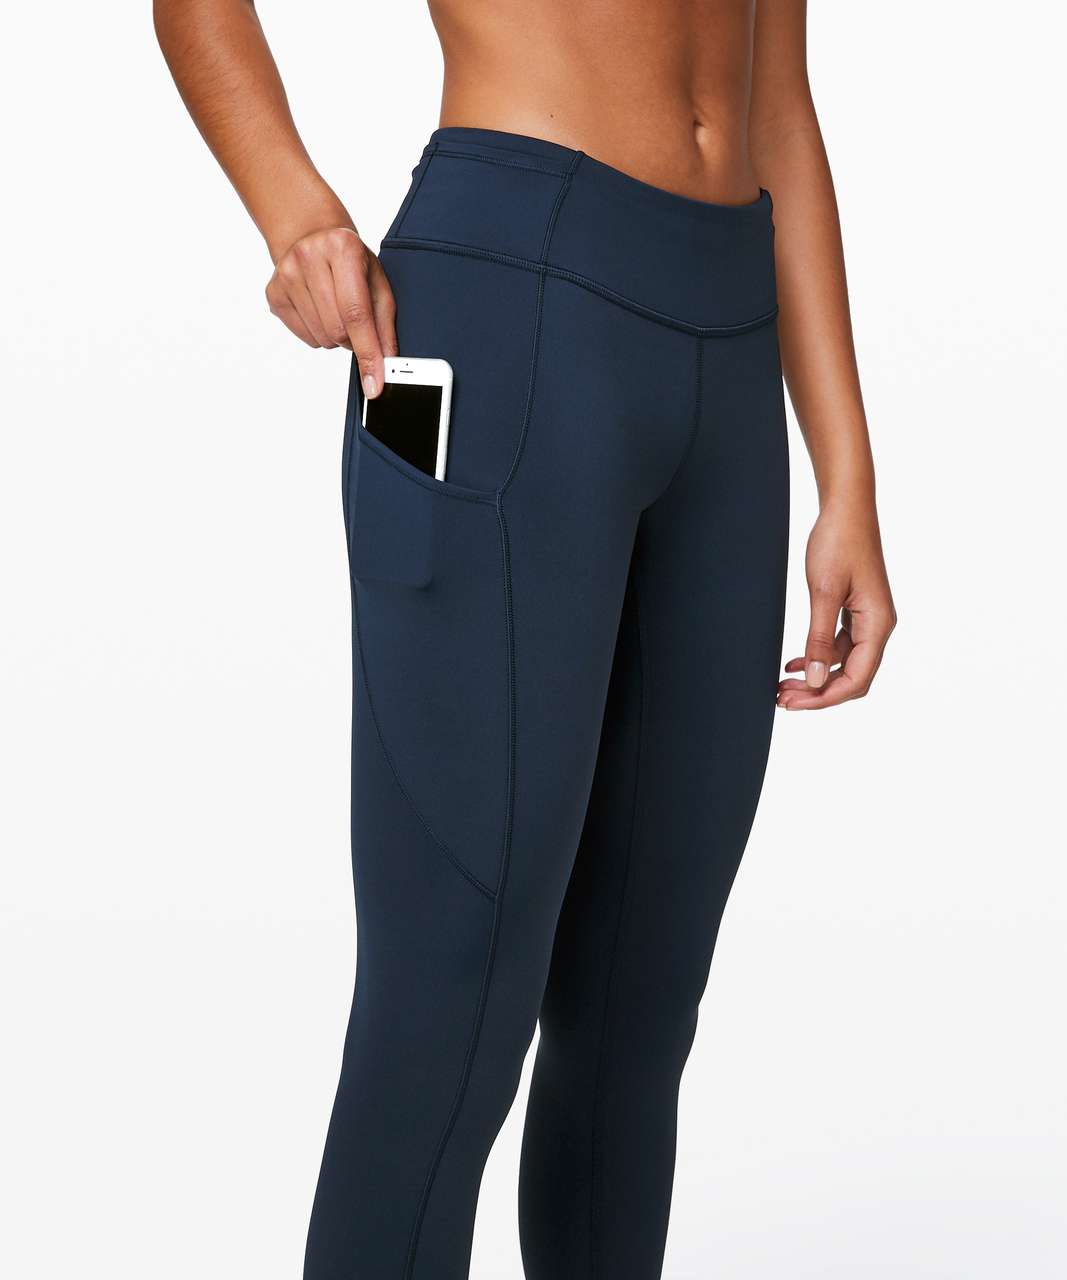 lululemon Fast * Free High-Rise Tight 25 True Navy Size 14 MSRP $128.00  **NWT**